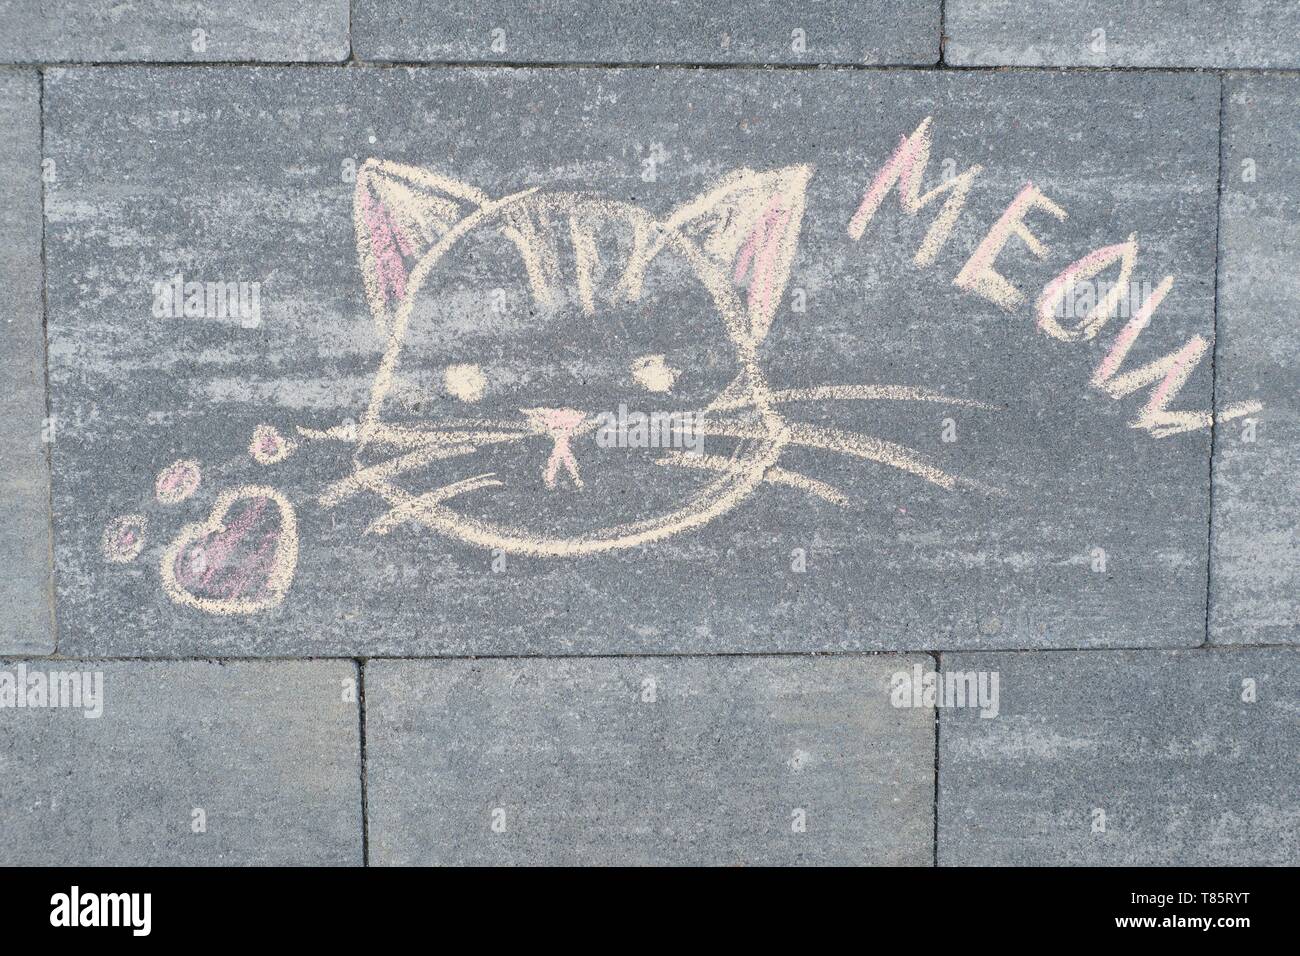 Meow text and cat picture written on gray sidewalk in crayons, top view Stock Photo